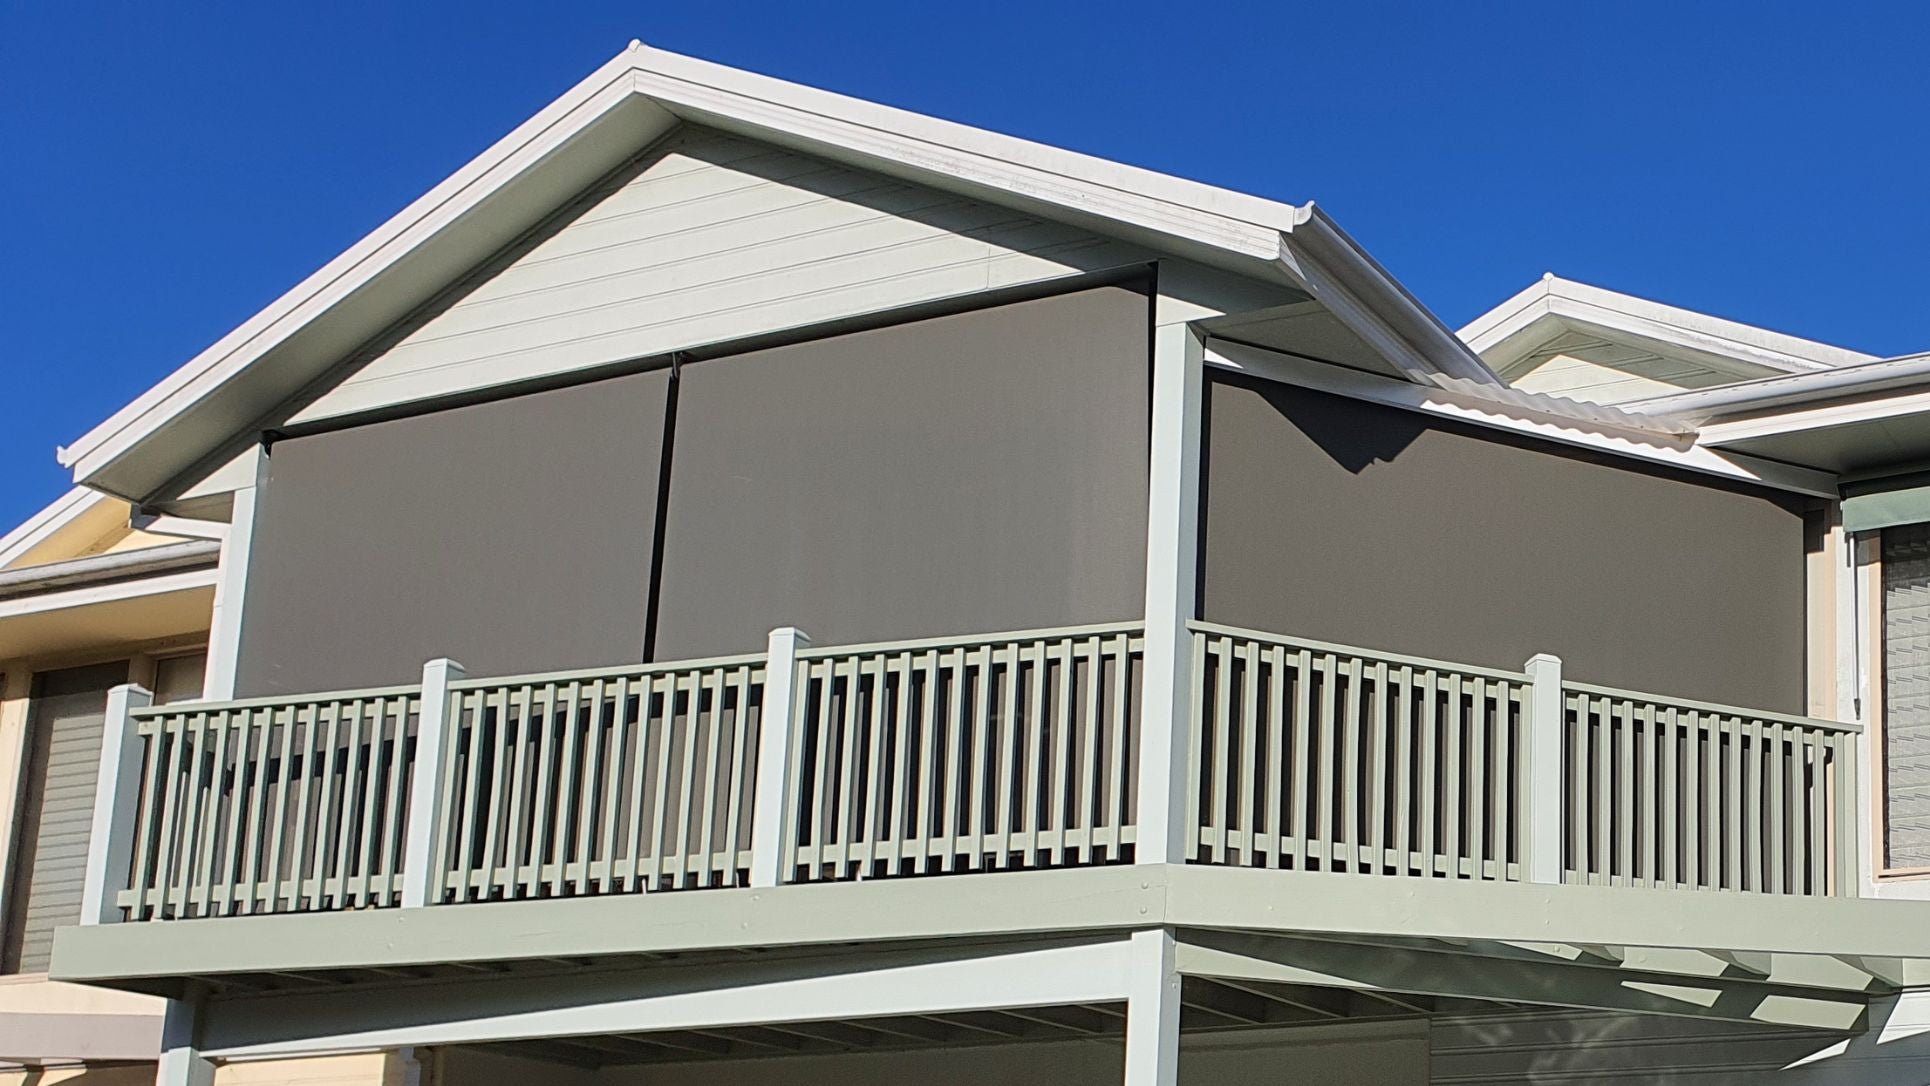 Install outdoor shade blinds with ease